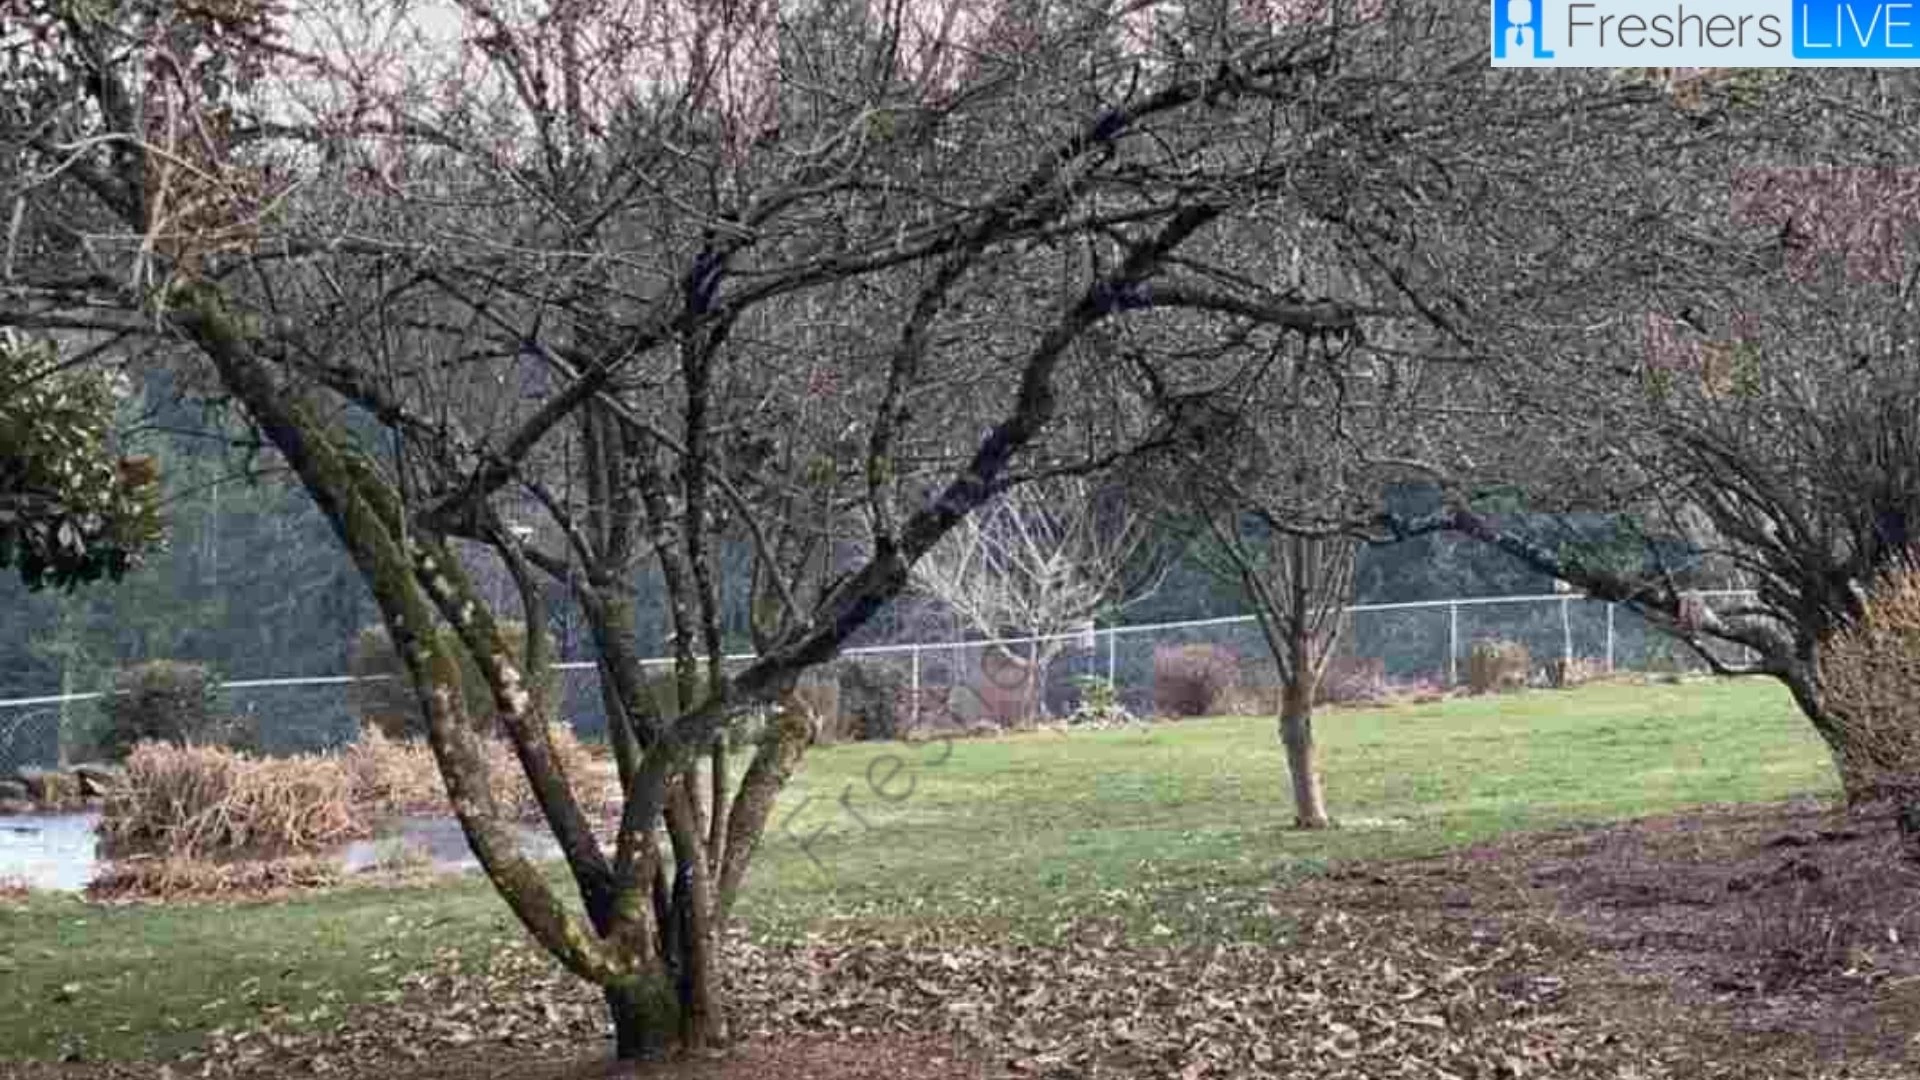 Test your Sharp Vision and spot 2 cats hiding at the park in 5 seconds